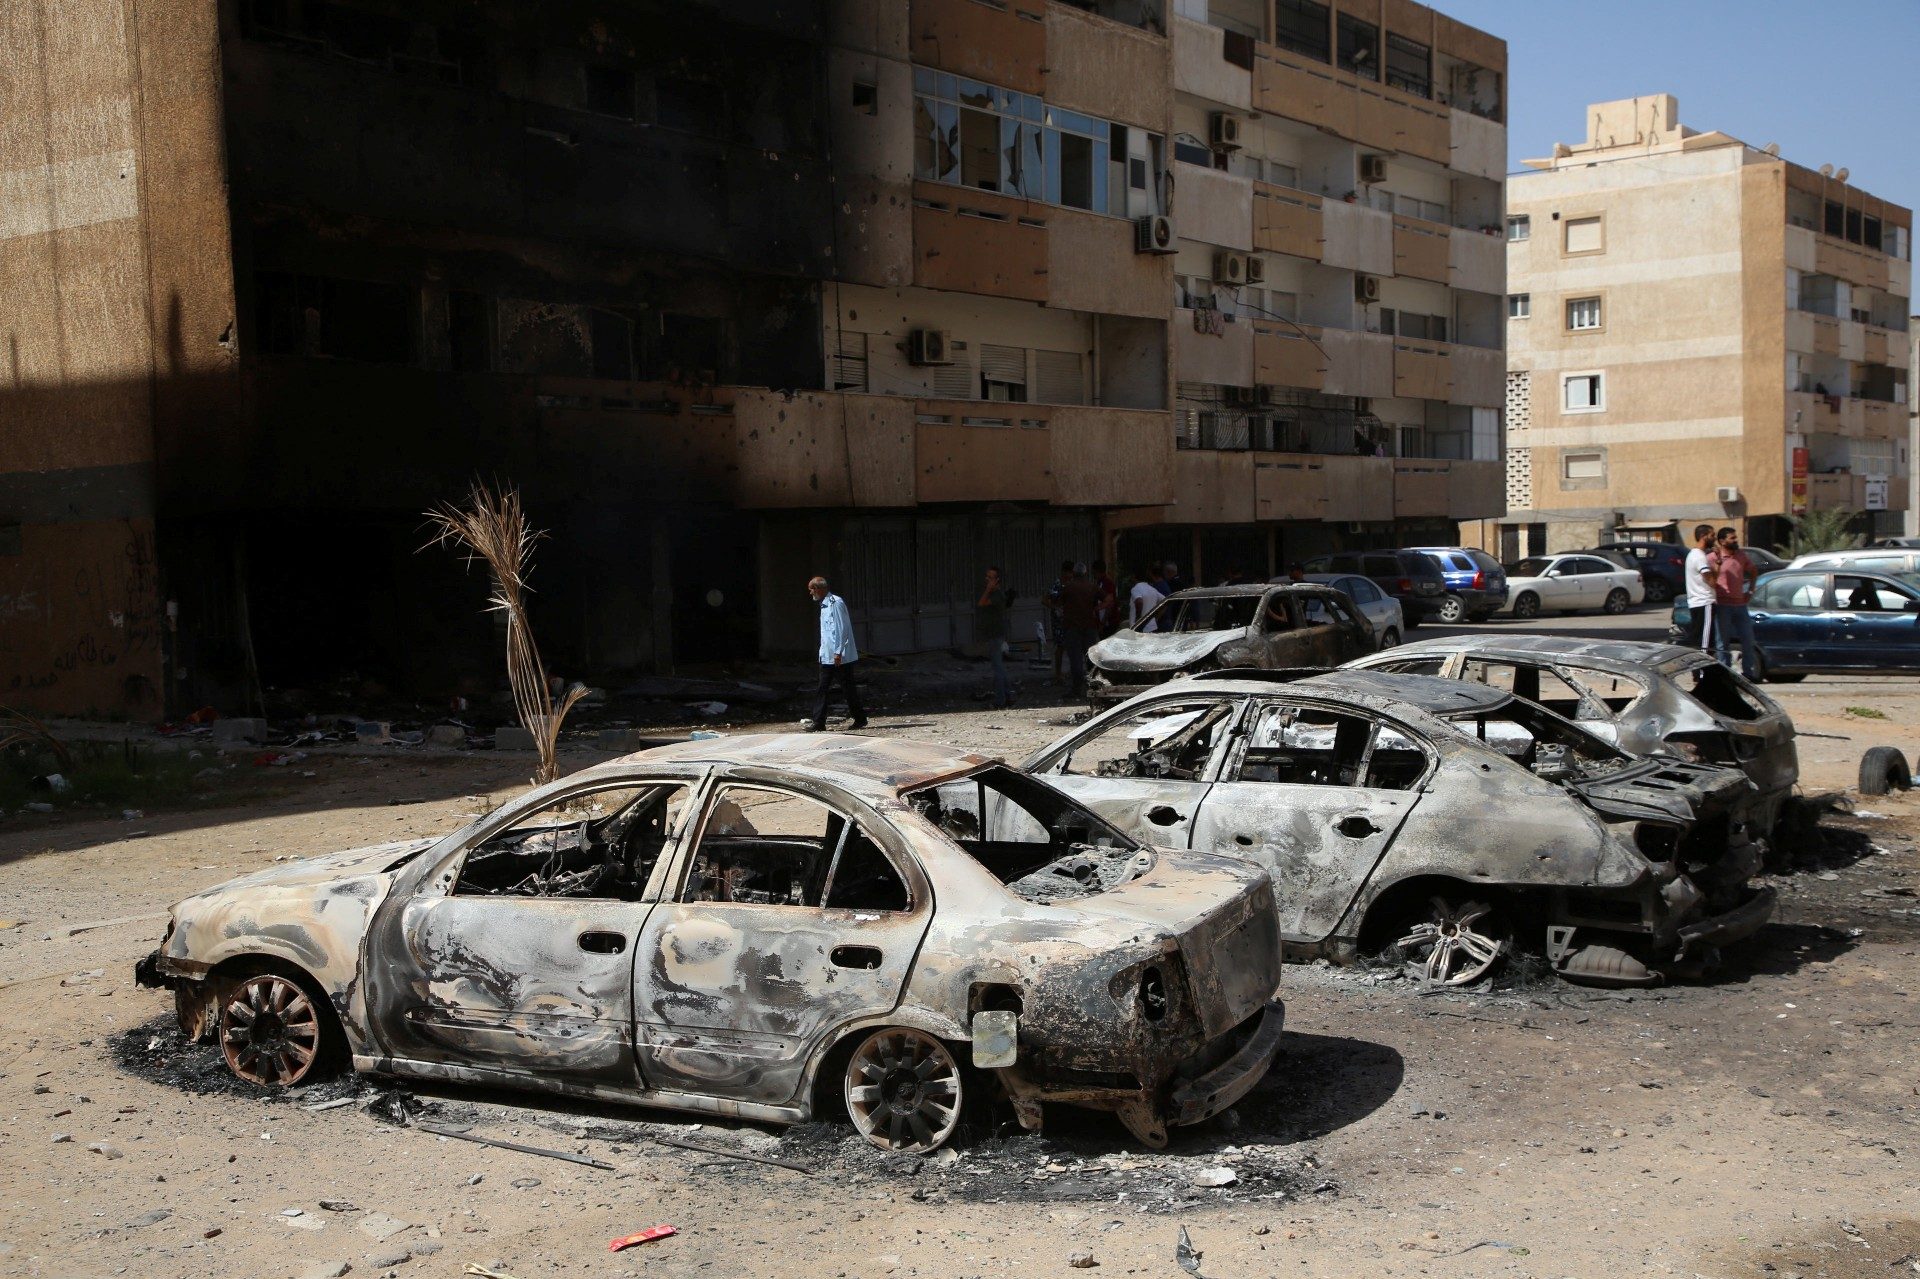 Tripoli calm, Libya riven after worst fighting in years